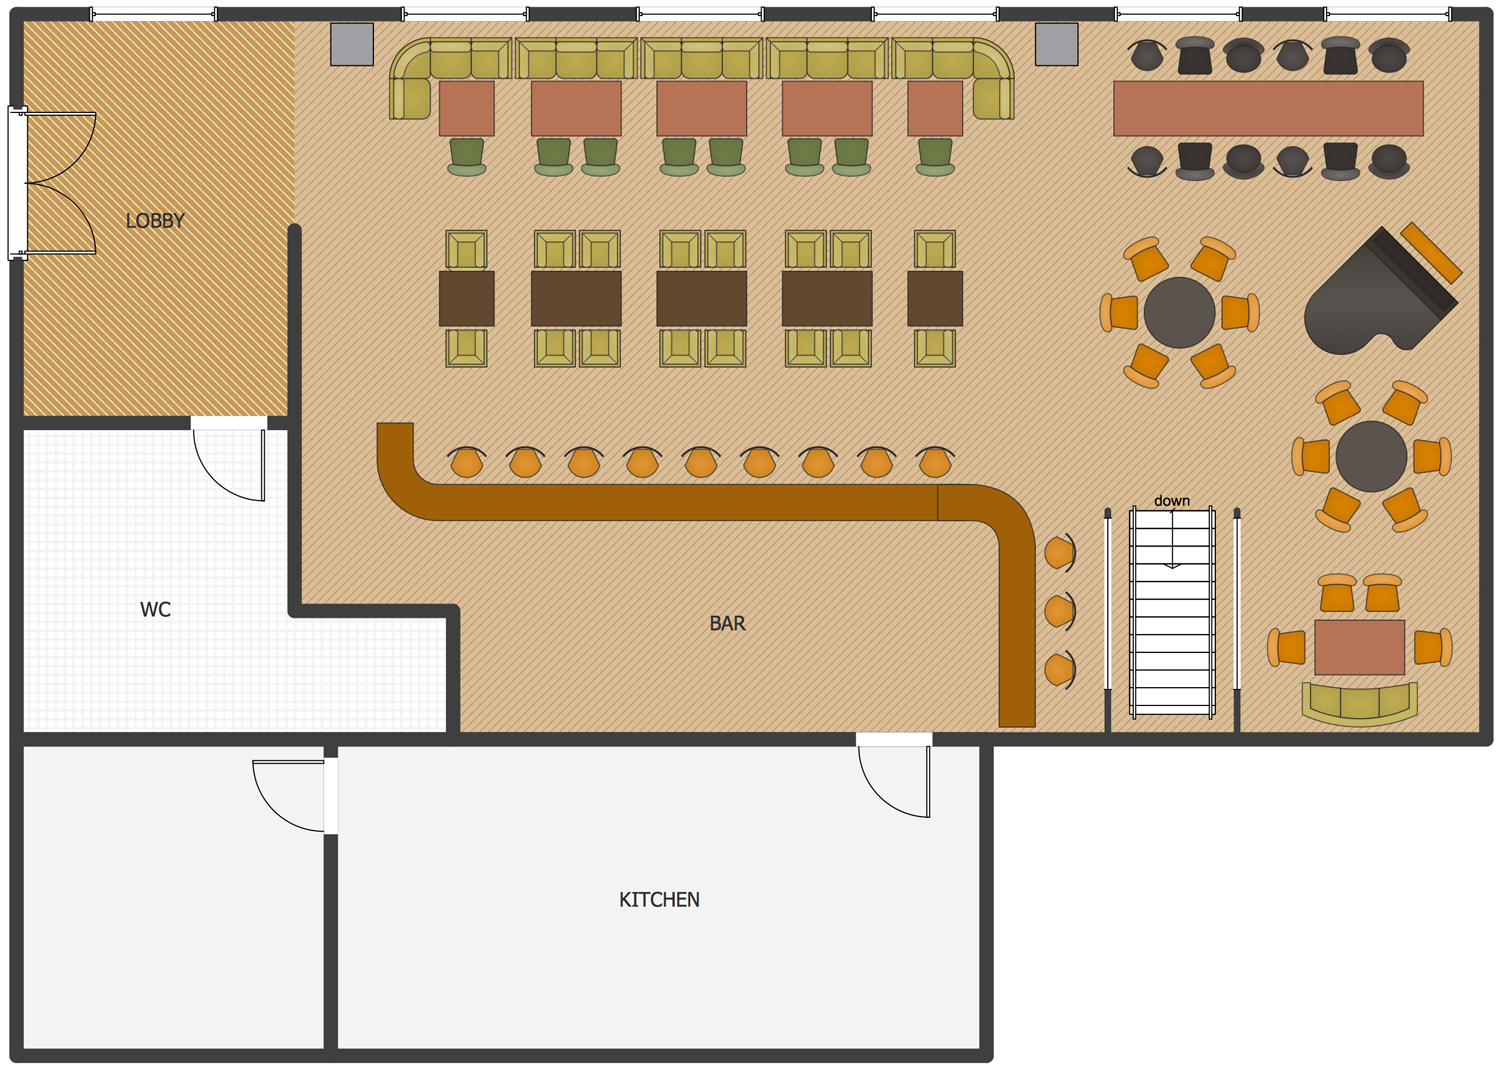 cafe and restaurant floor plan solution | conceptdraw